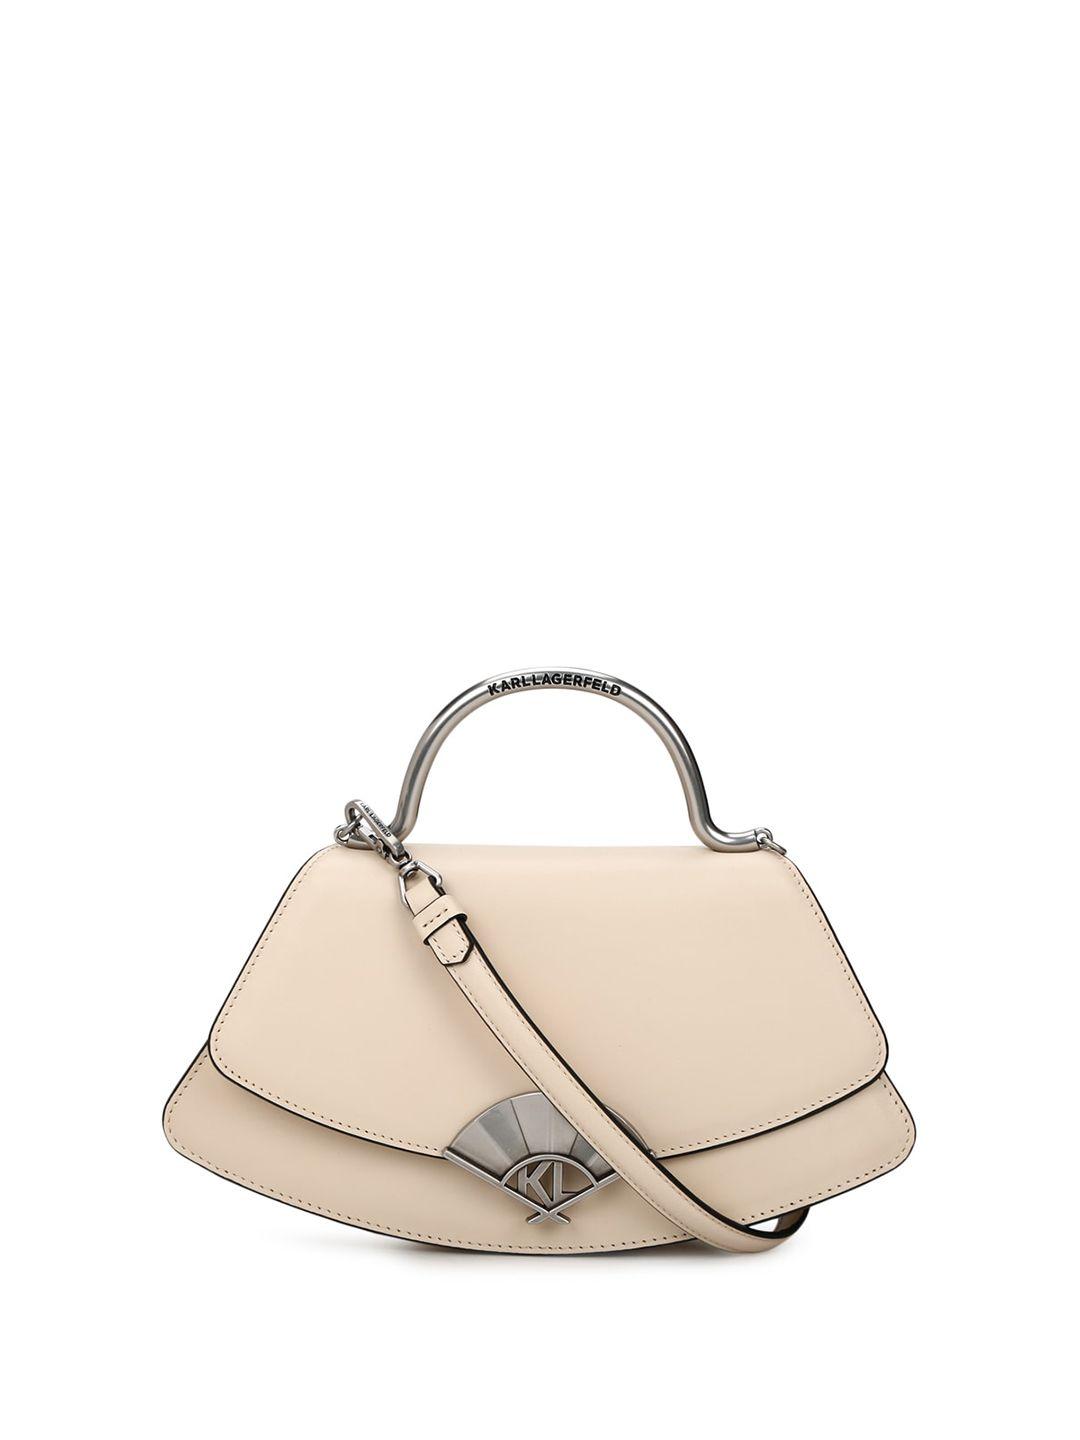 karl lagerfeld structured leather satchel bag